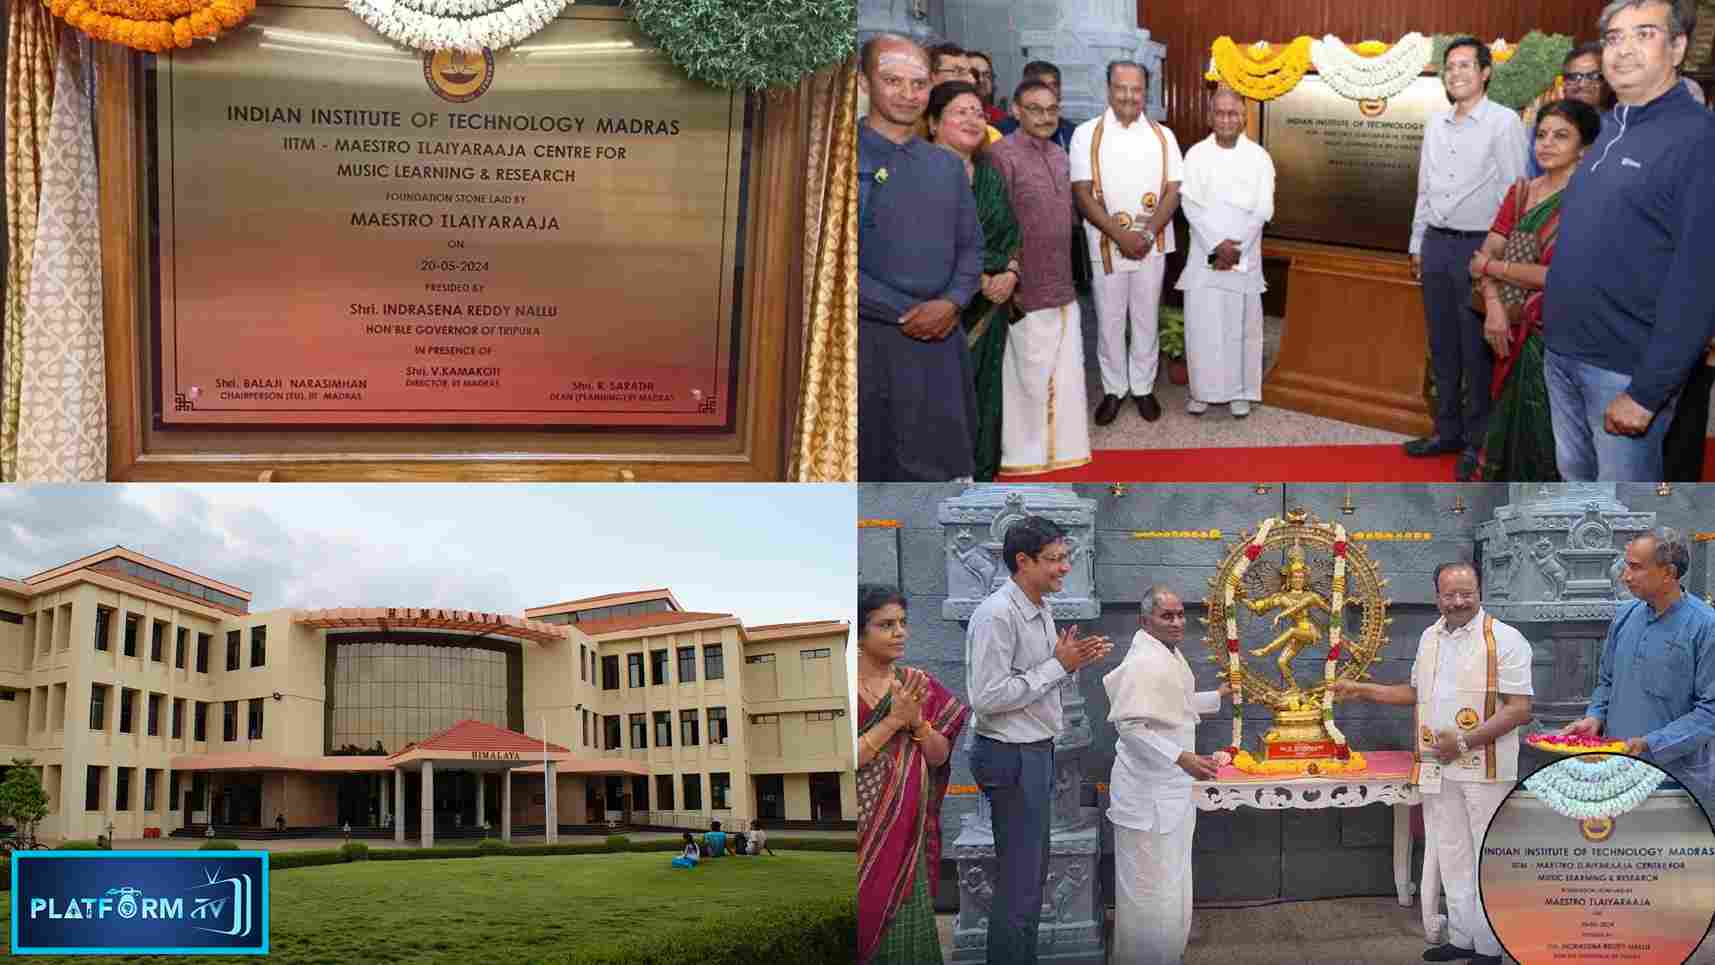 Ilayaraja Music Learning And Research Centre - Platform Tamil